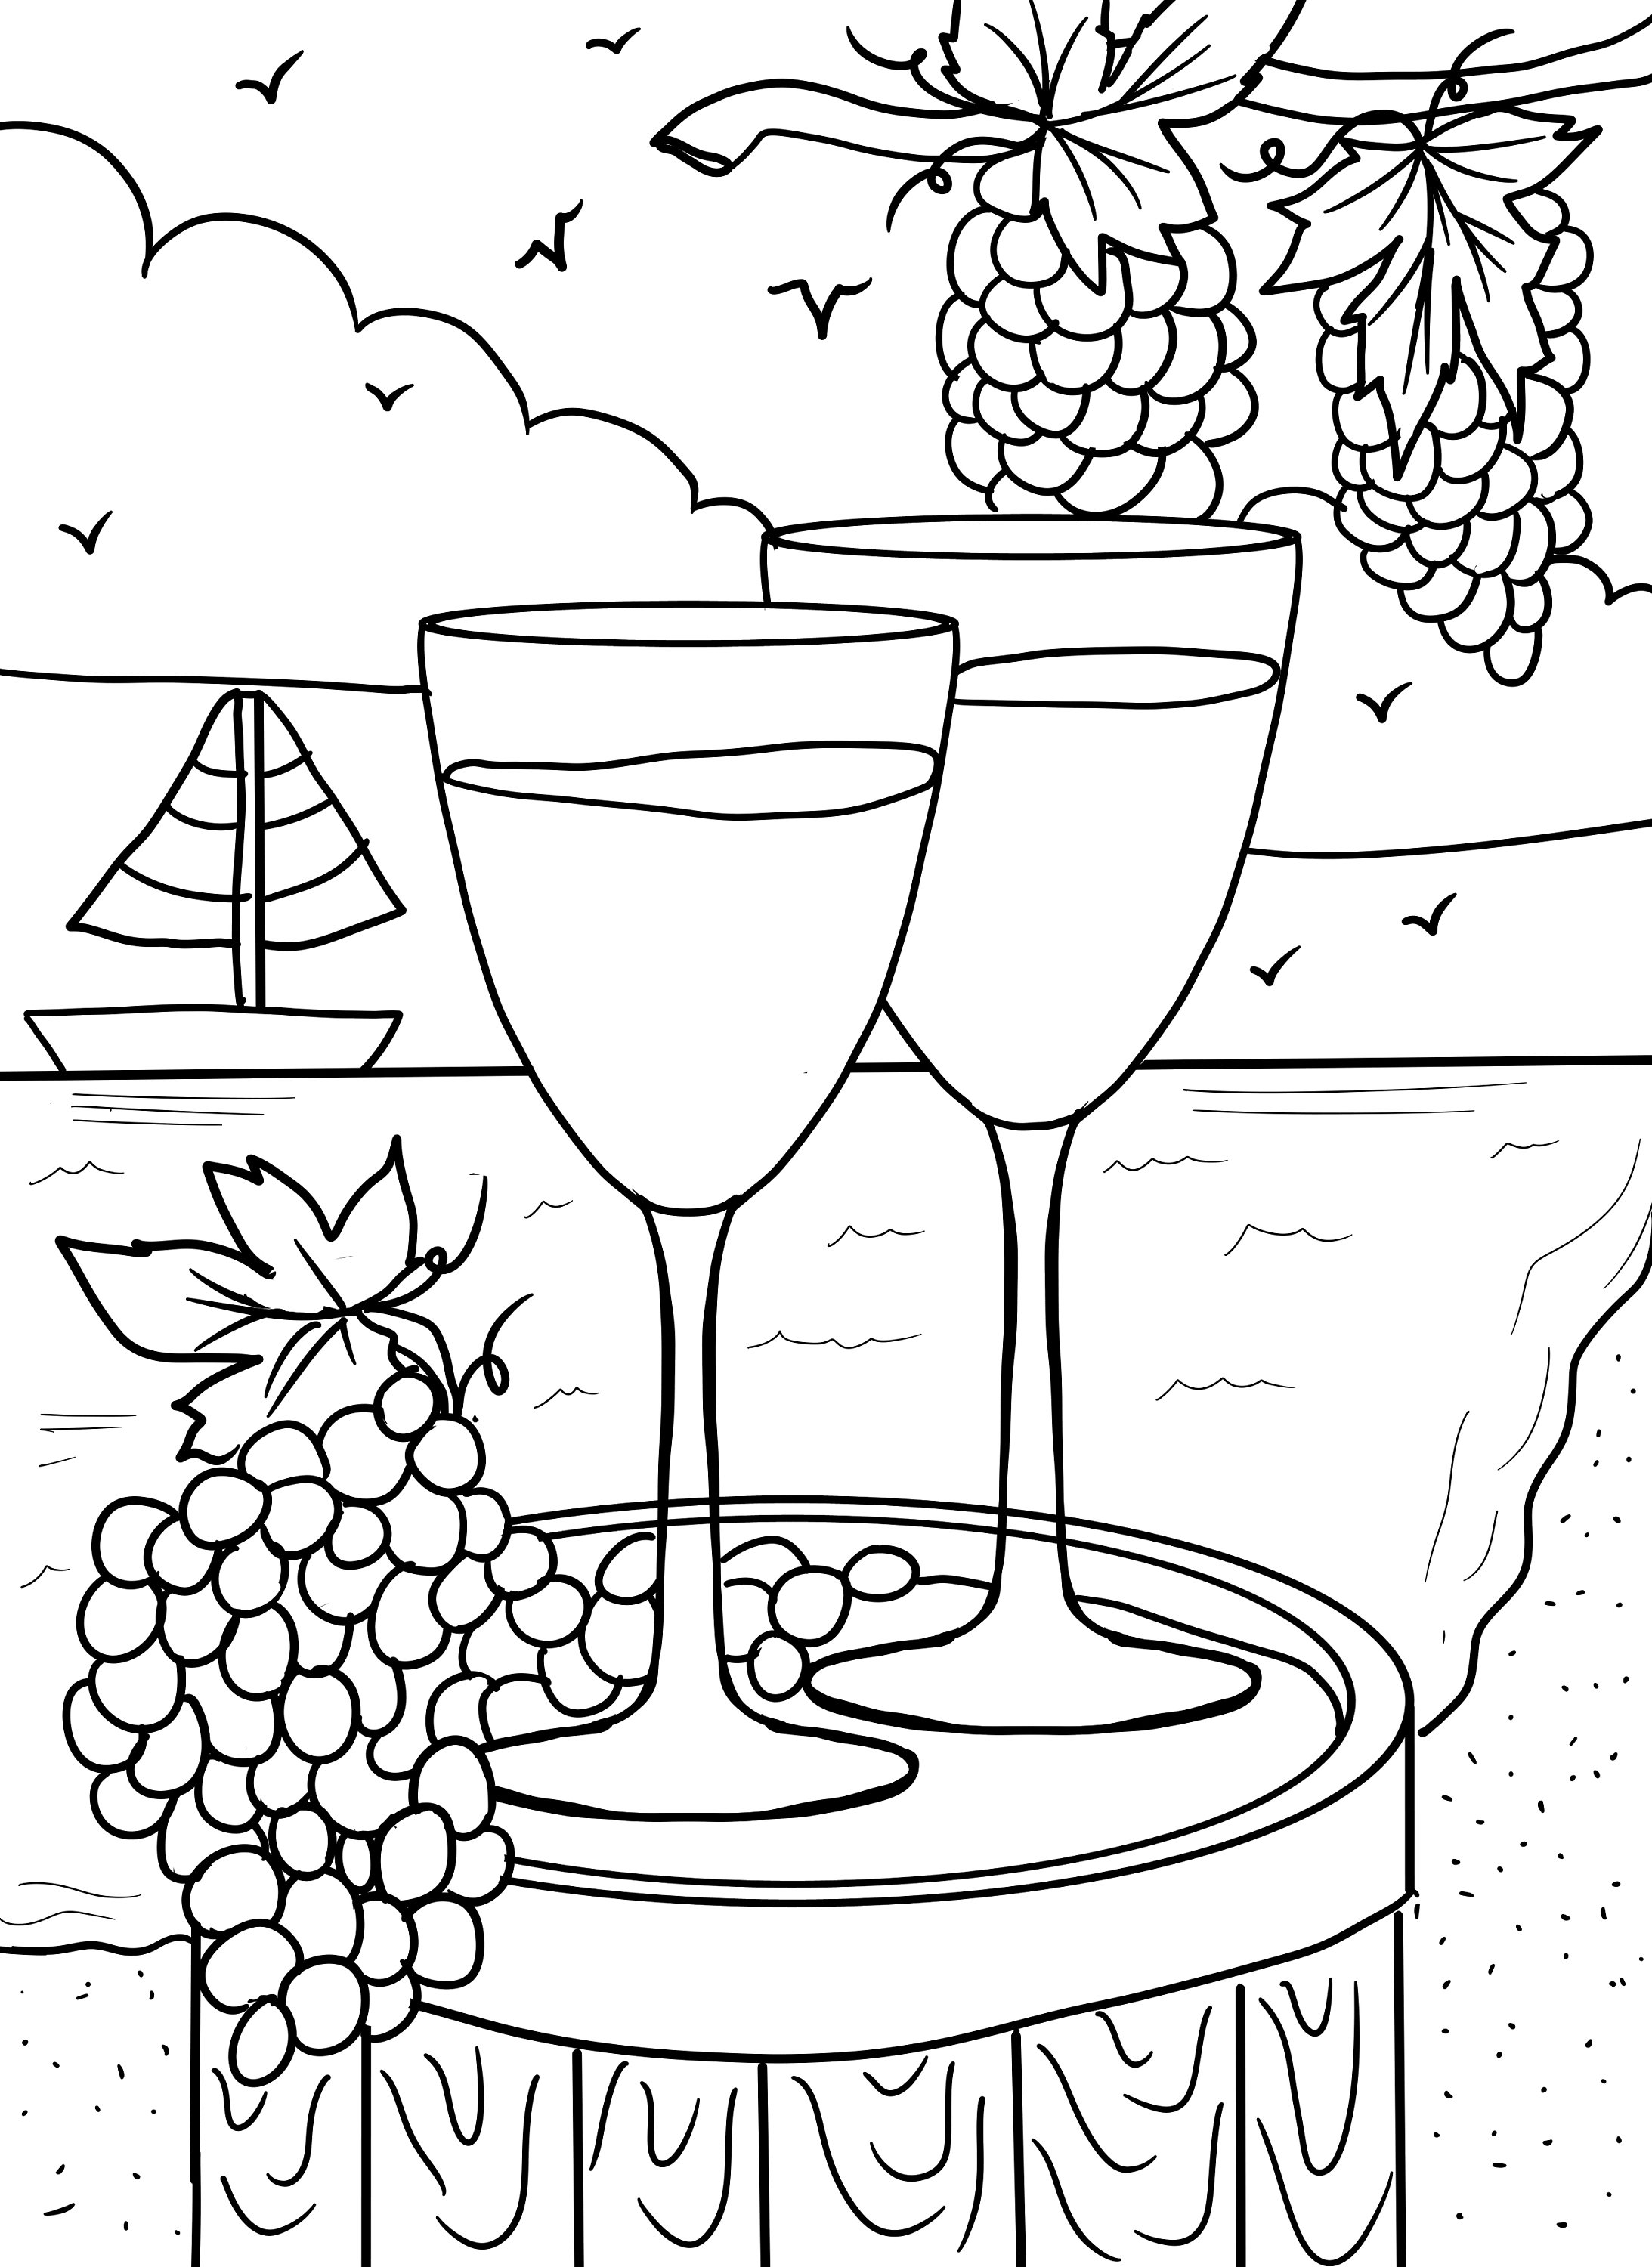 Wine and sailboat coloring page digital download pdf grapes sun wine glass beach shore